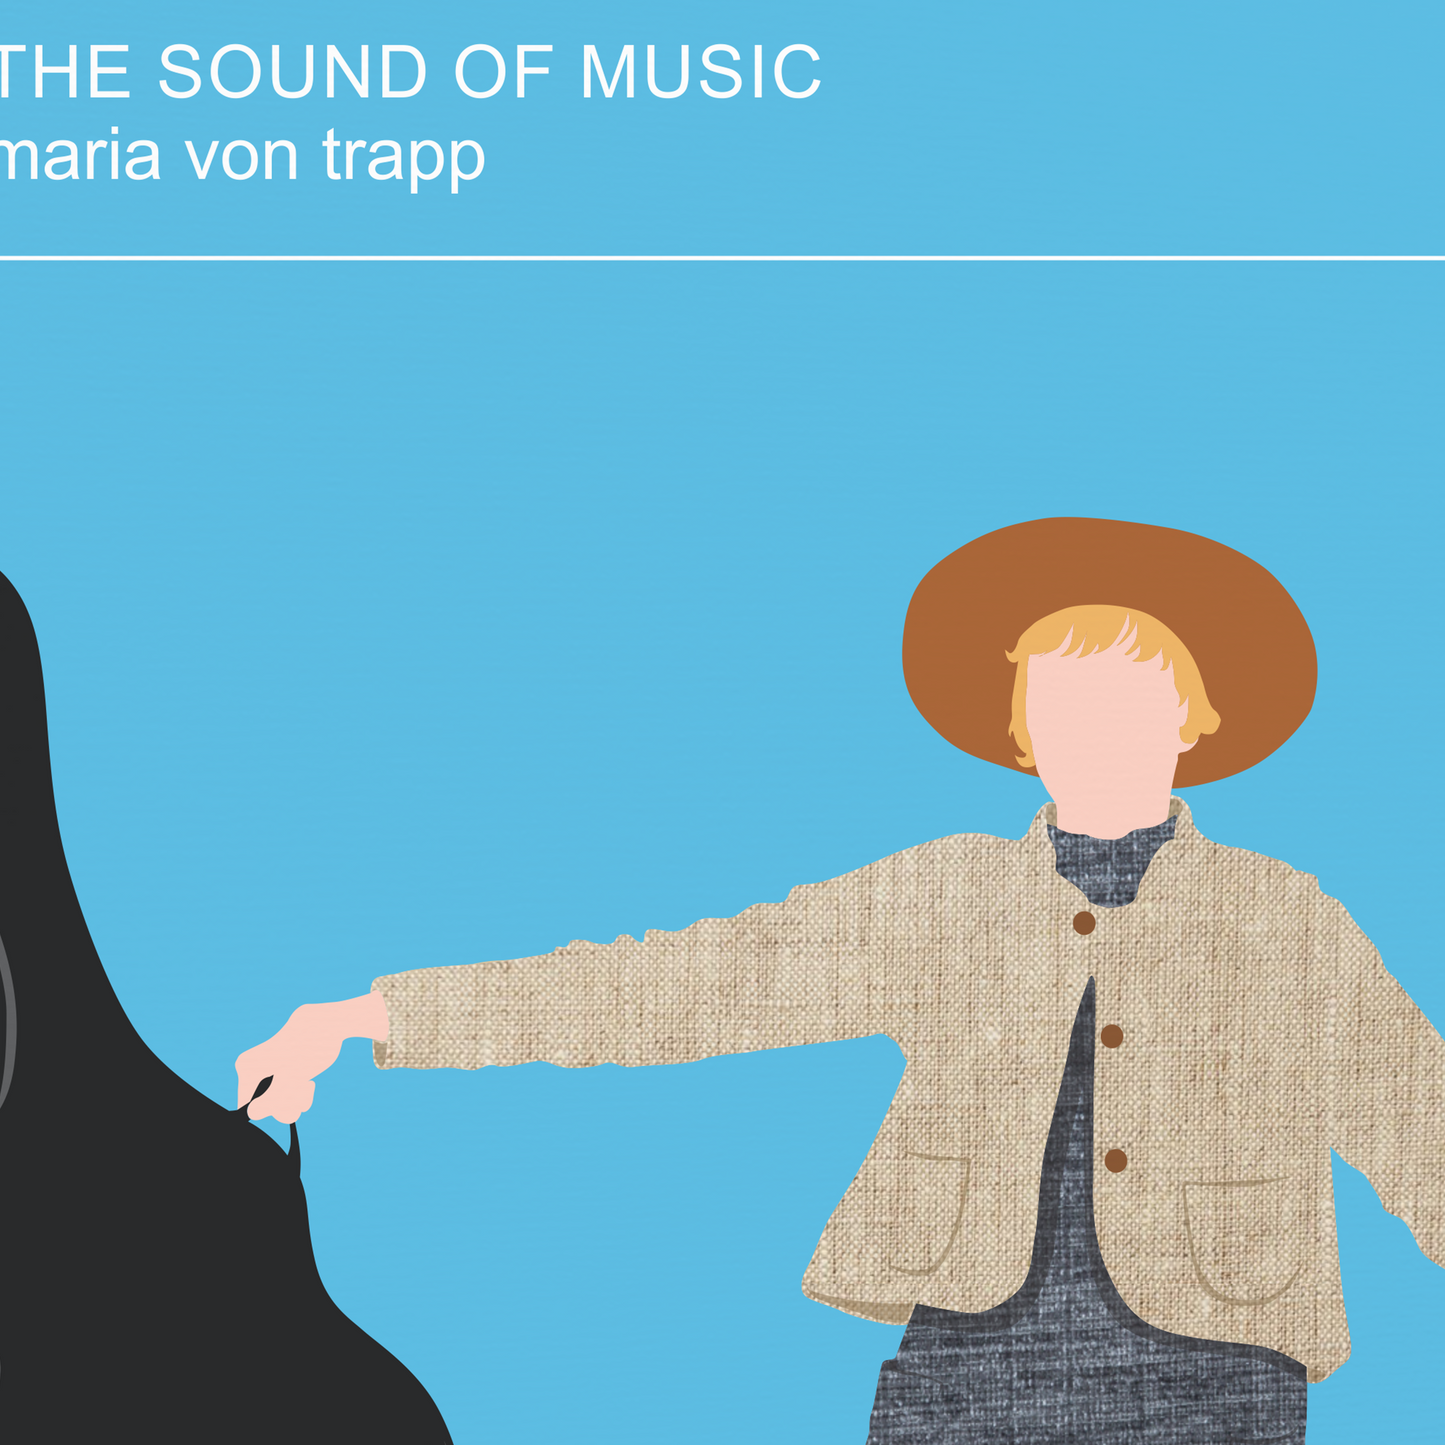 The Sound of Music Set of 2 minimalist movie posters